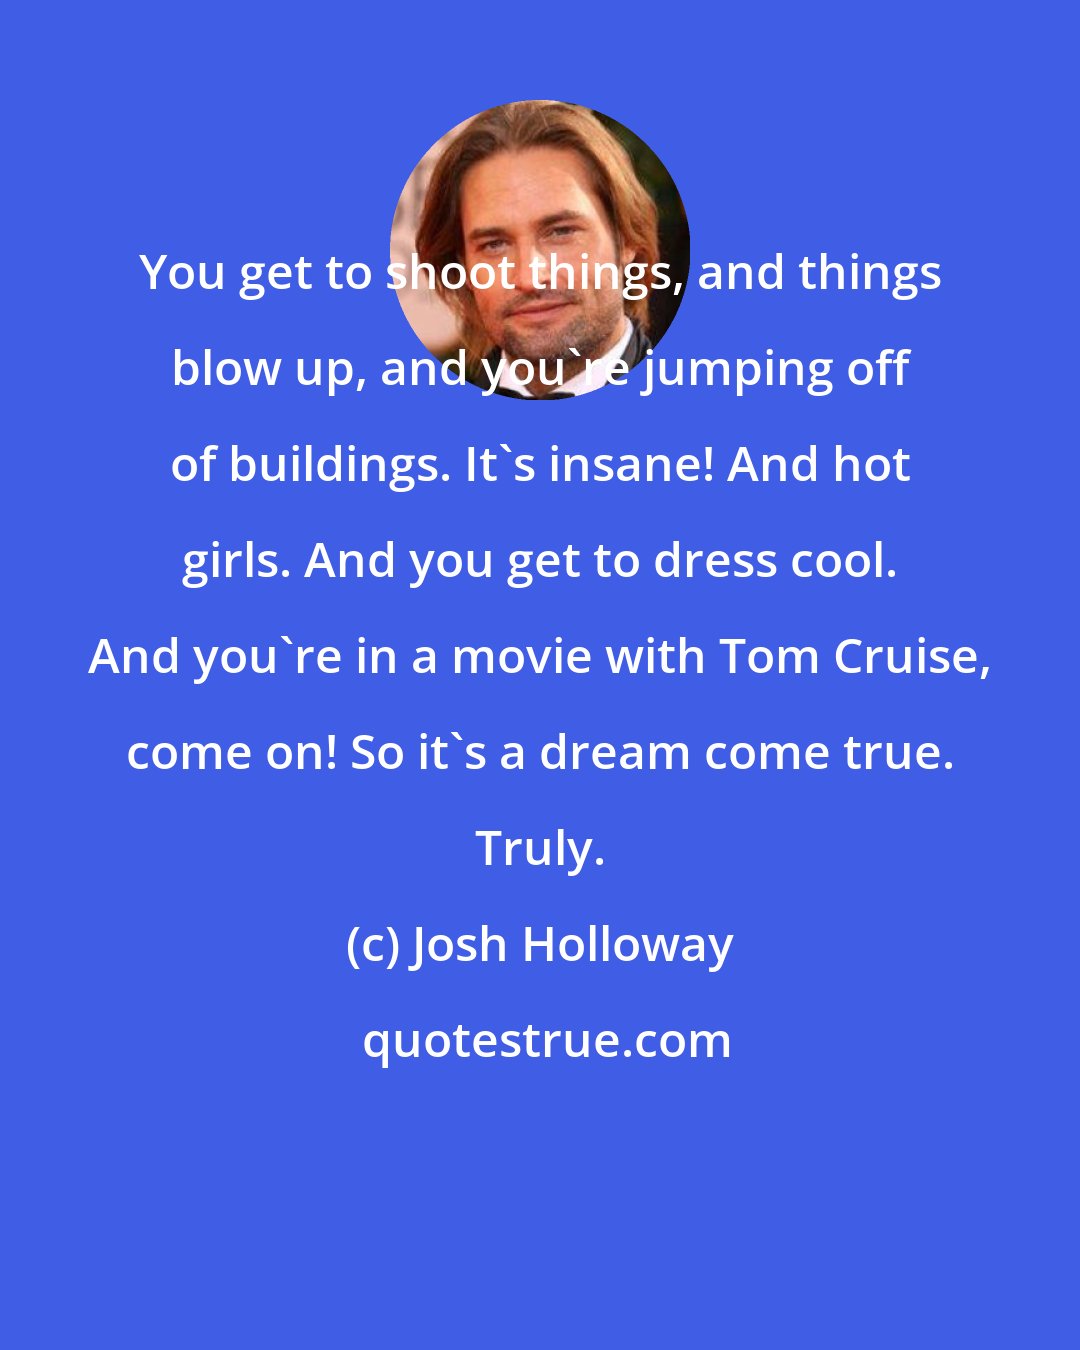 Josh Holloway: You get to shoot things, and things blow up, and you're jumping off of buildings. It's insane! And hot girls. And you get to dress cool. And you're in a movie with Tom Cruise, come on! So it's a dream come true. Truly.